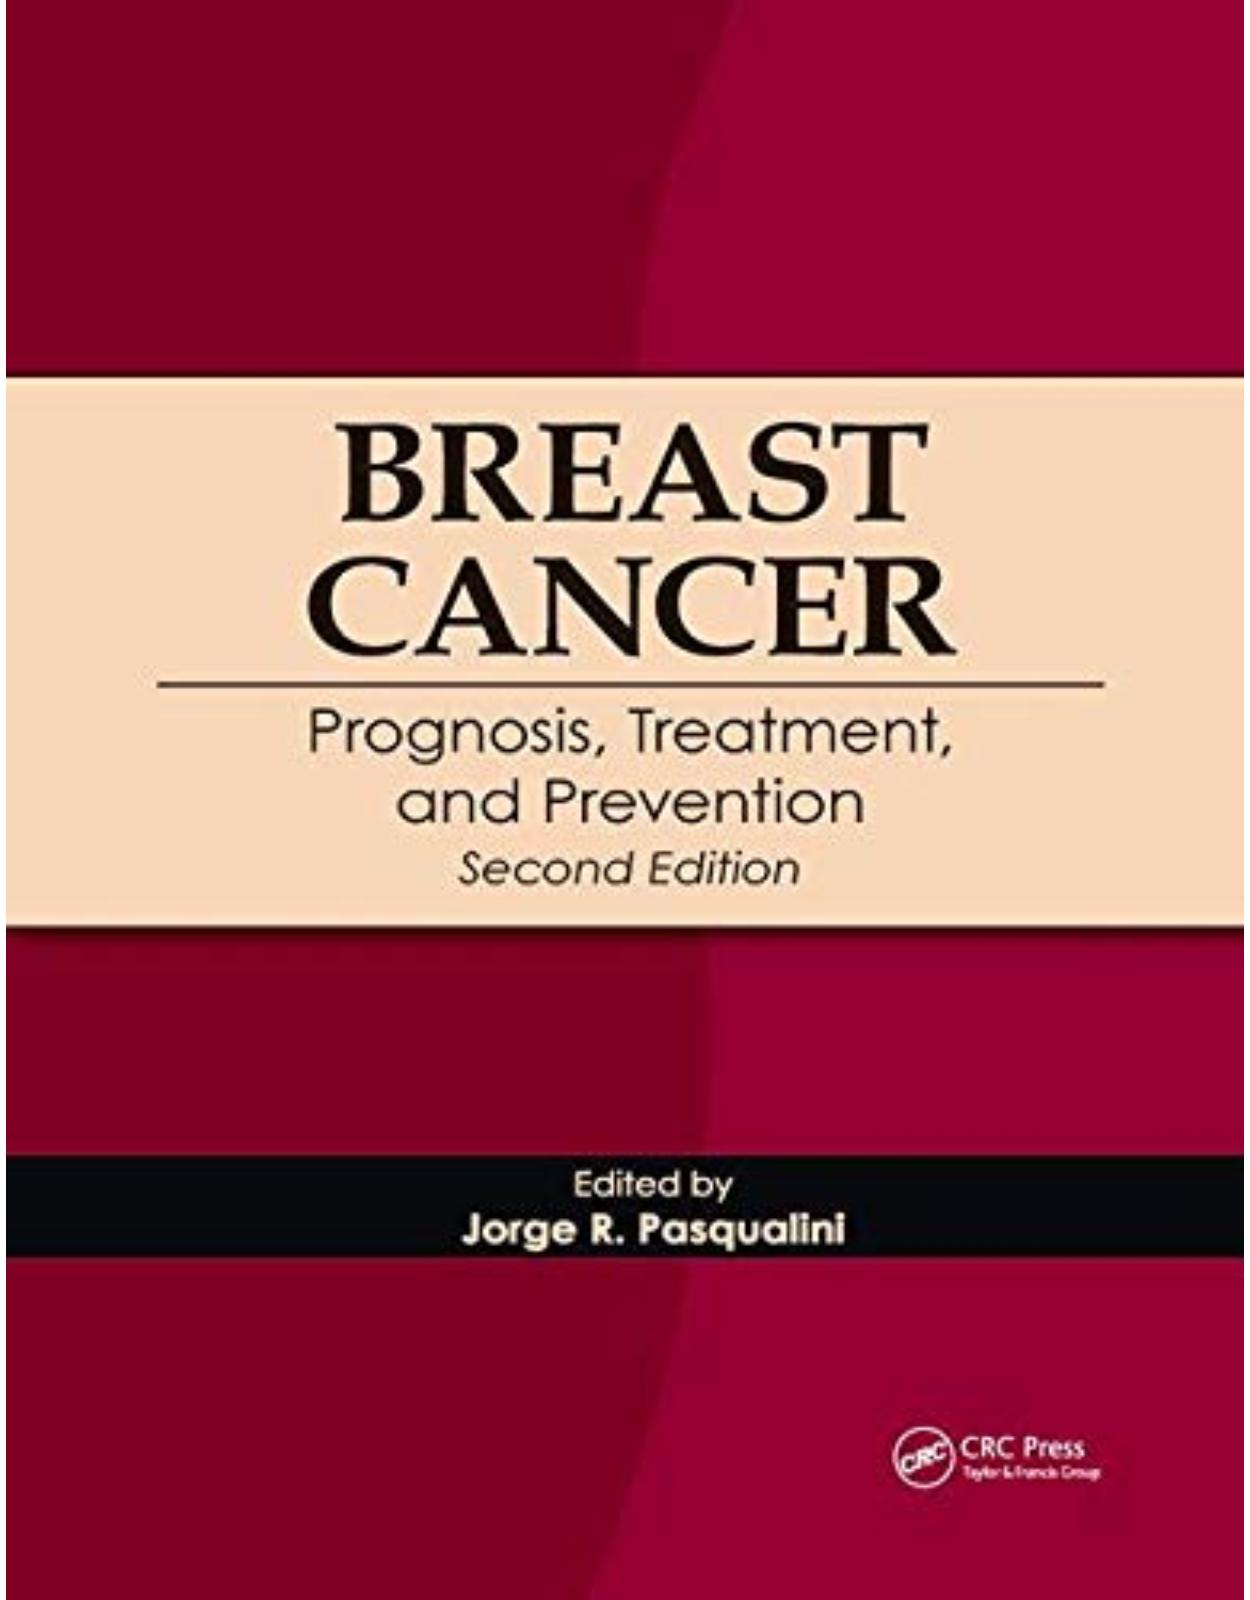 Breast Cancer Prognosis, Treatment, and Prevention